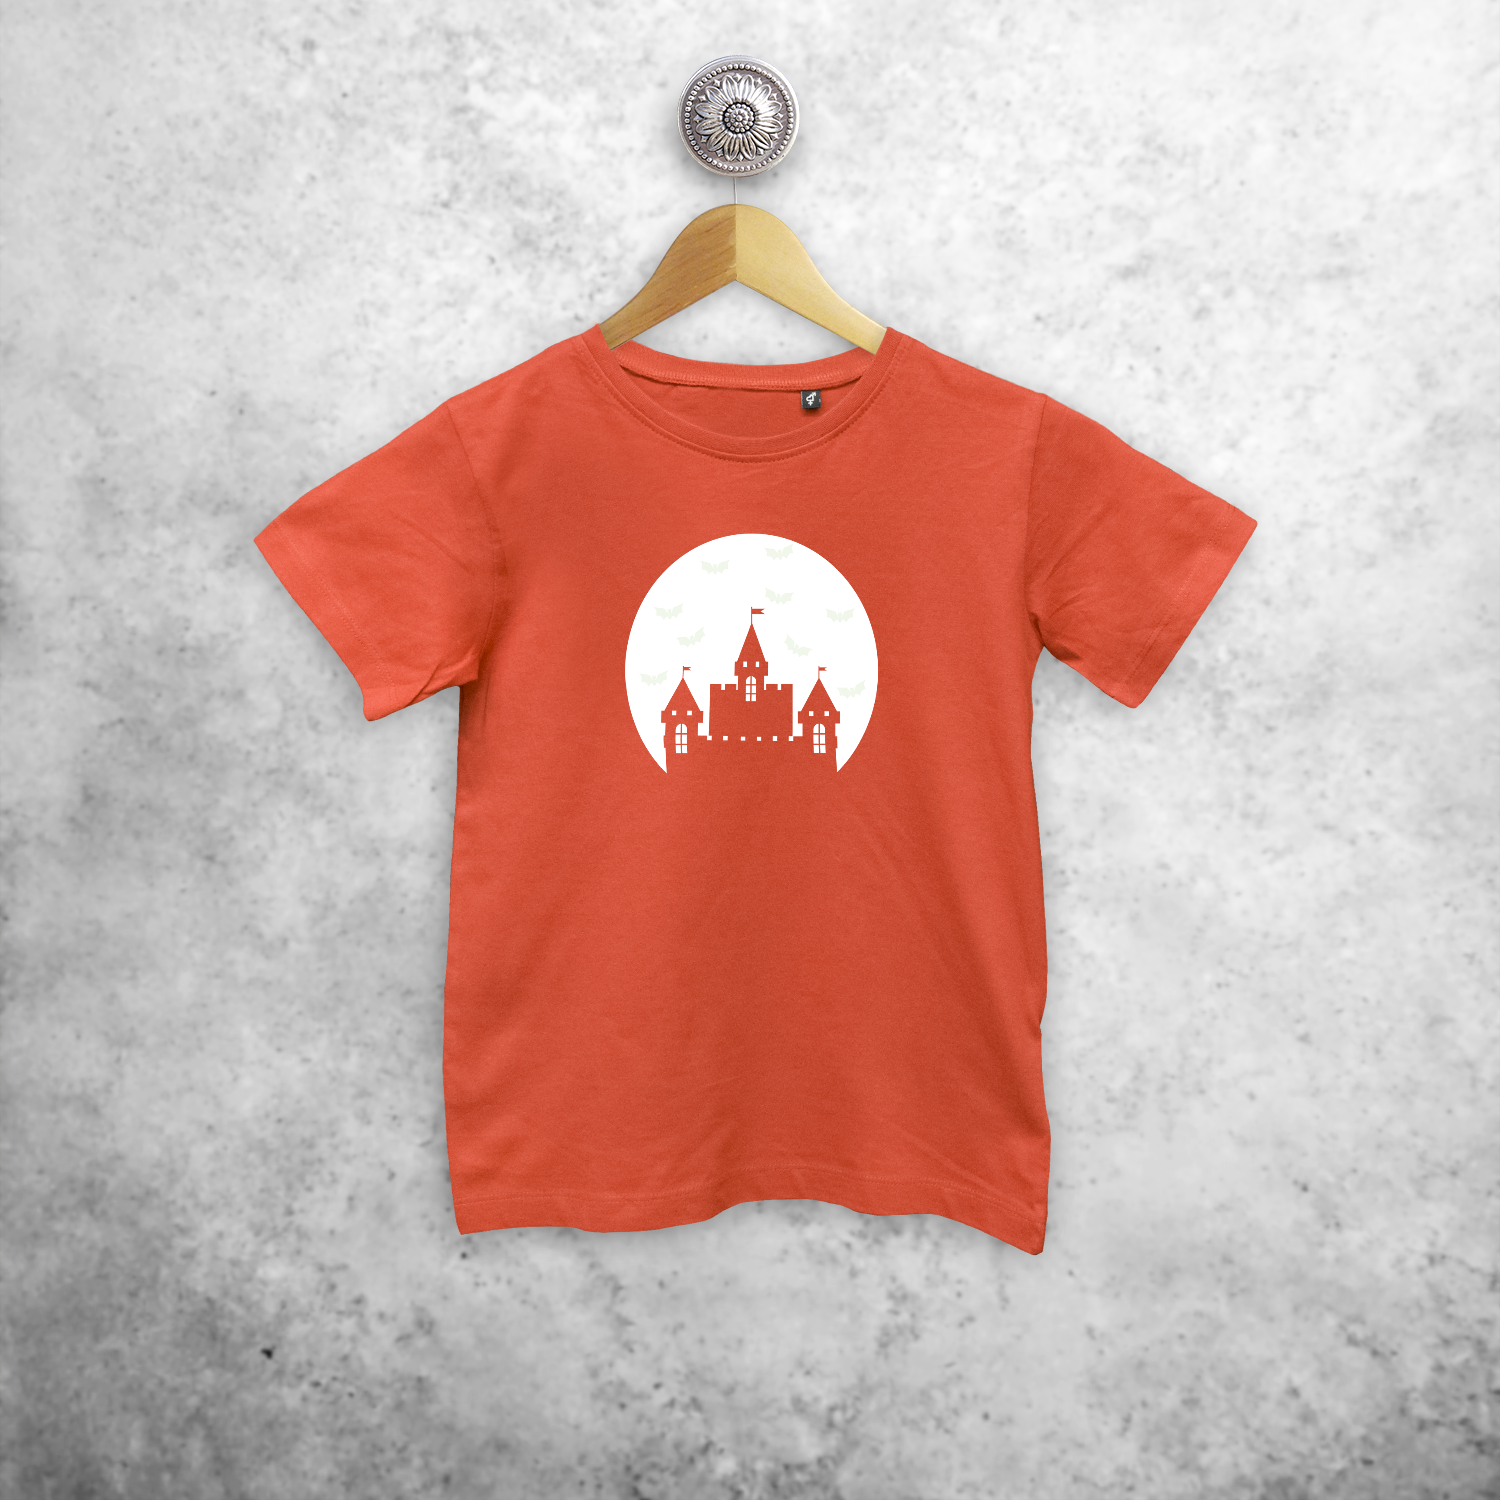 Castle and bats glow in the dark kids shortsleeve shirt